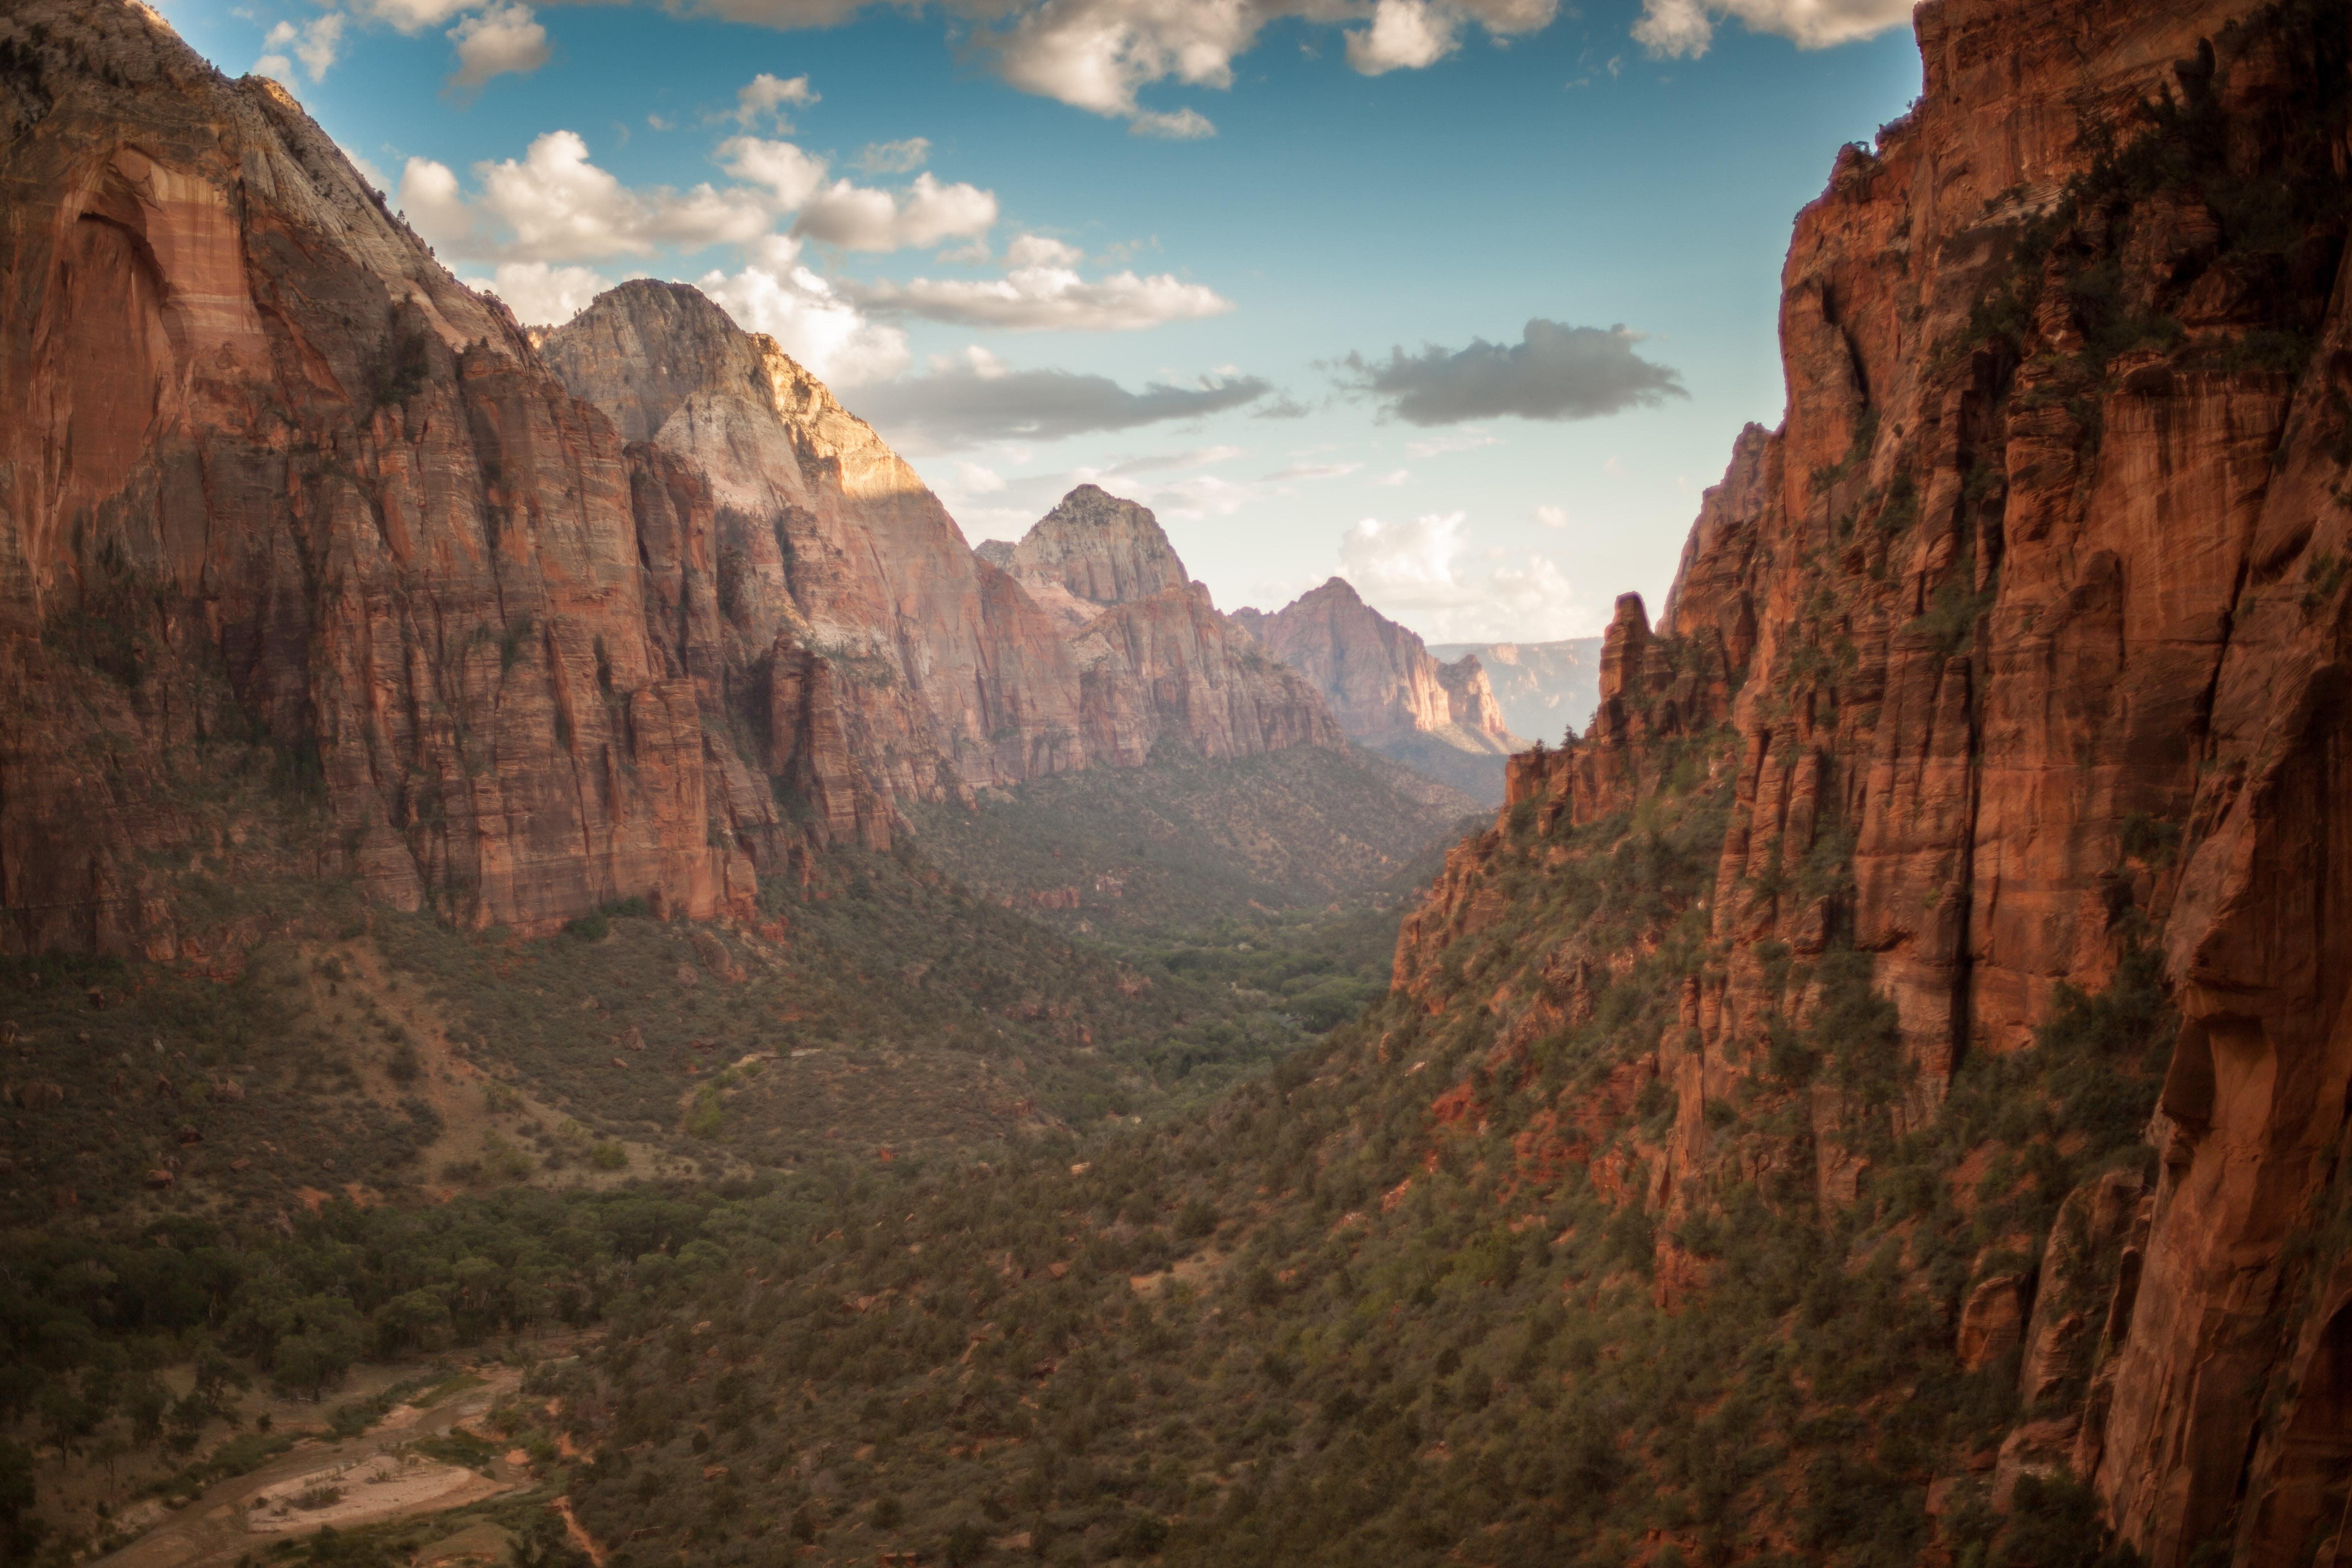 ZionCanyon.com: Helicopter Ride